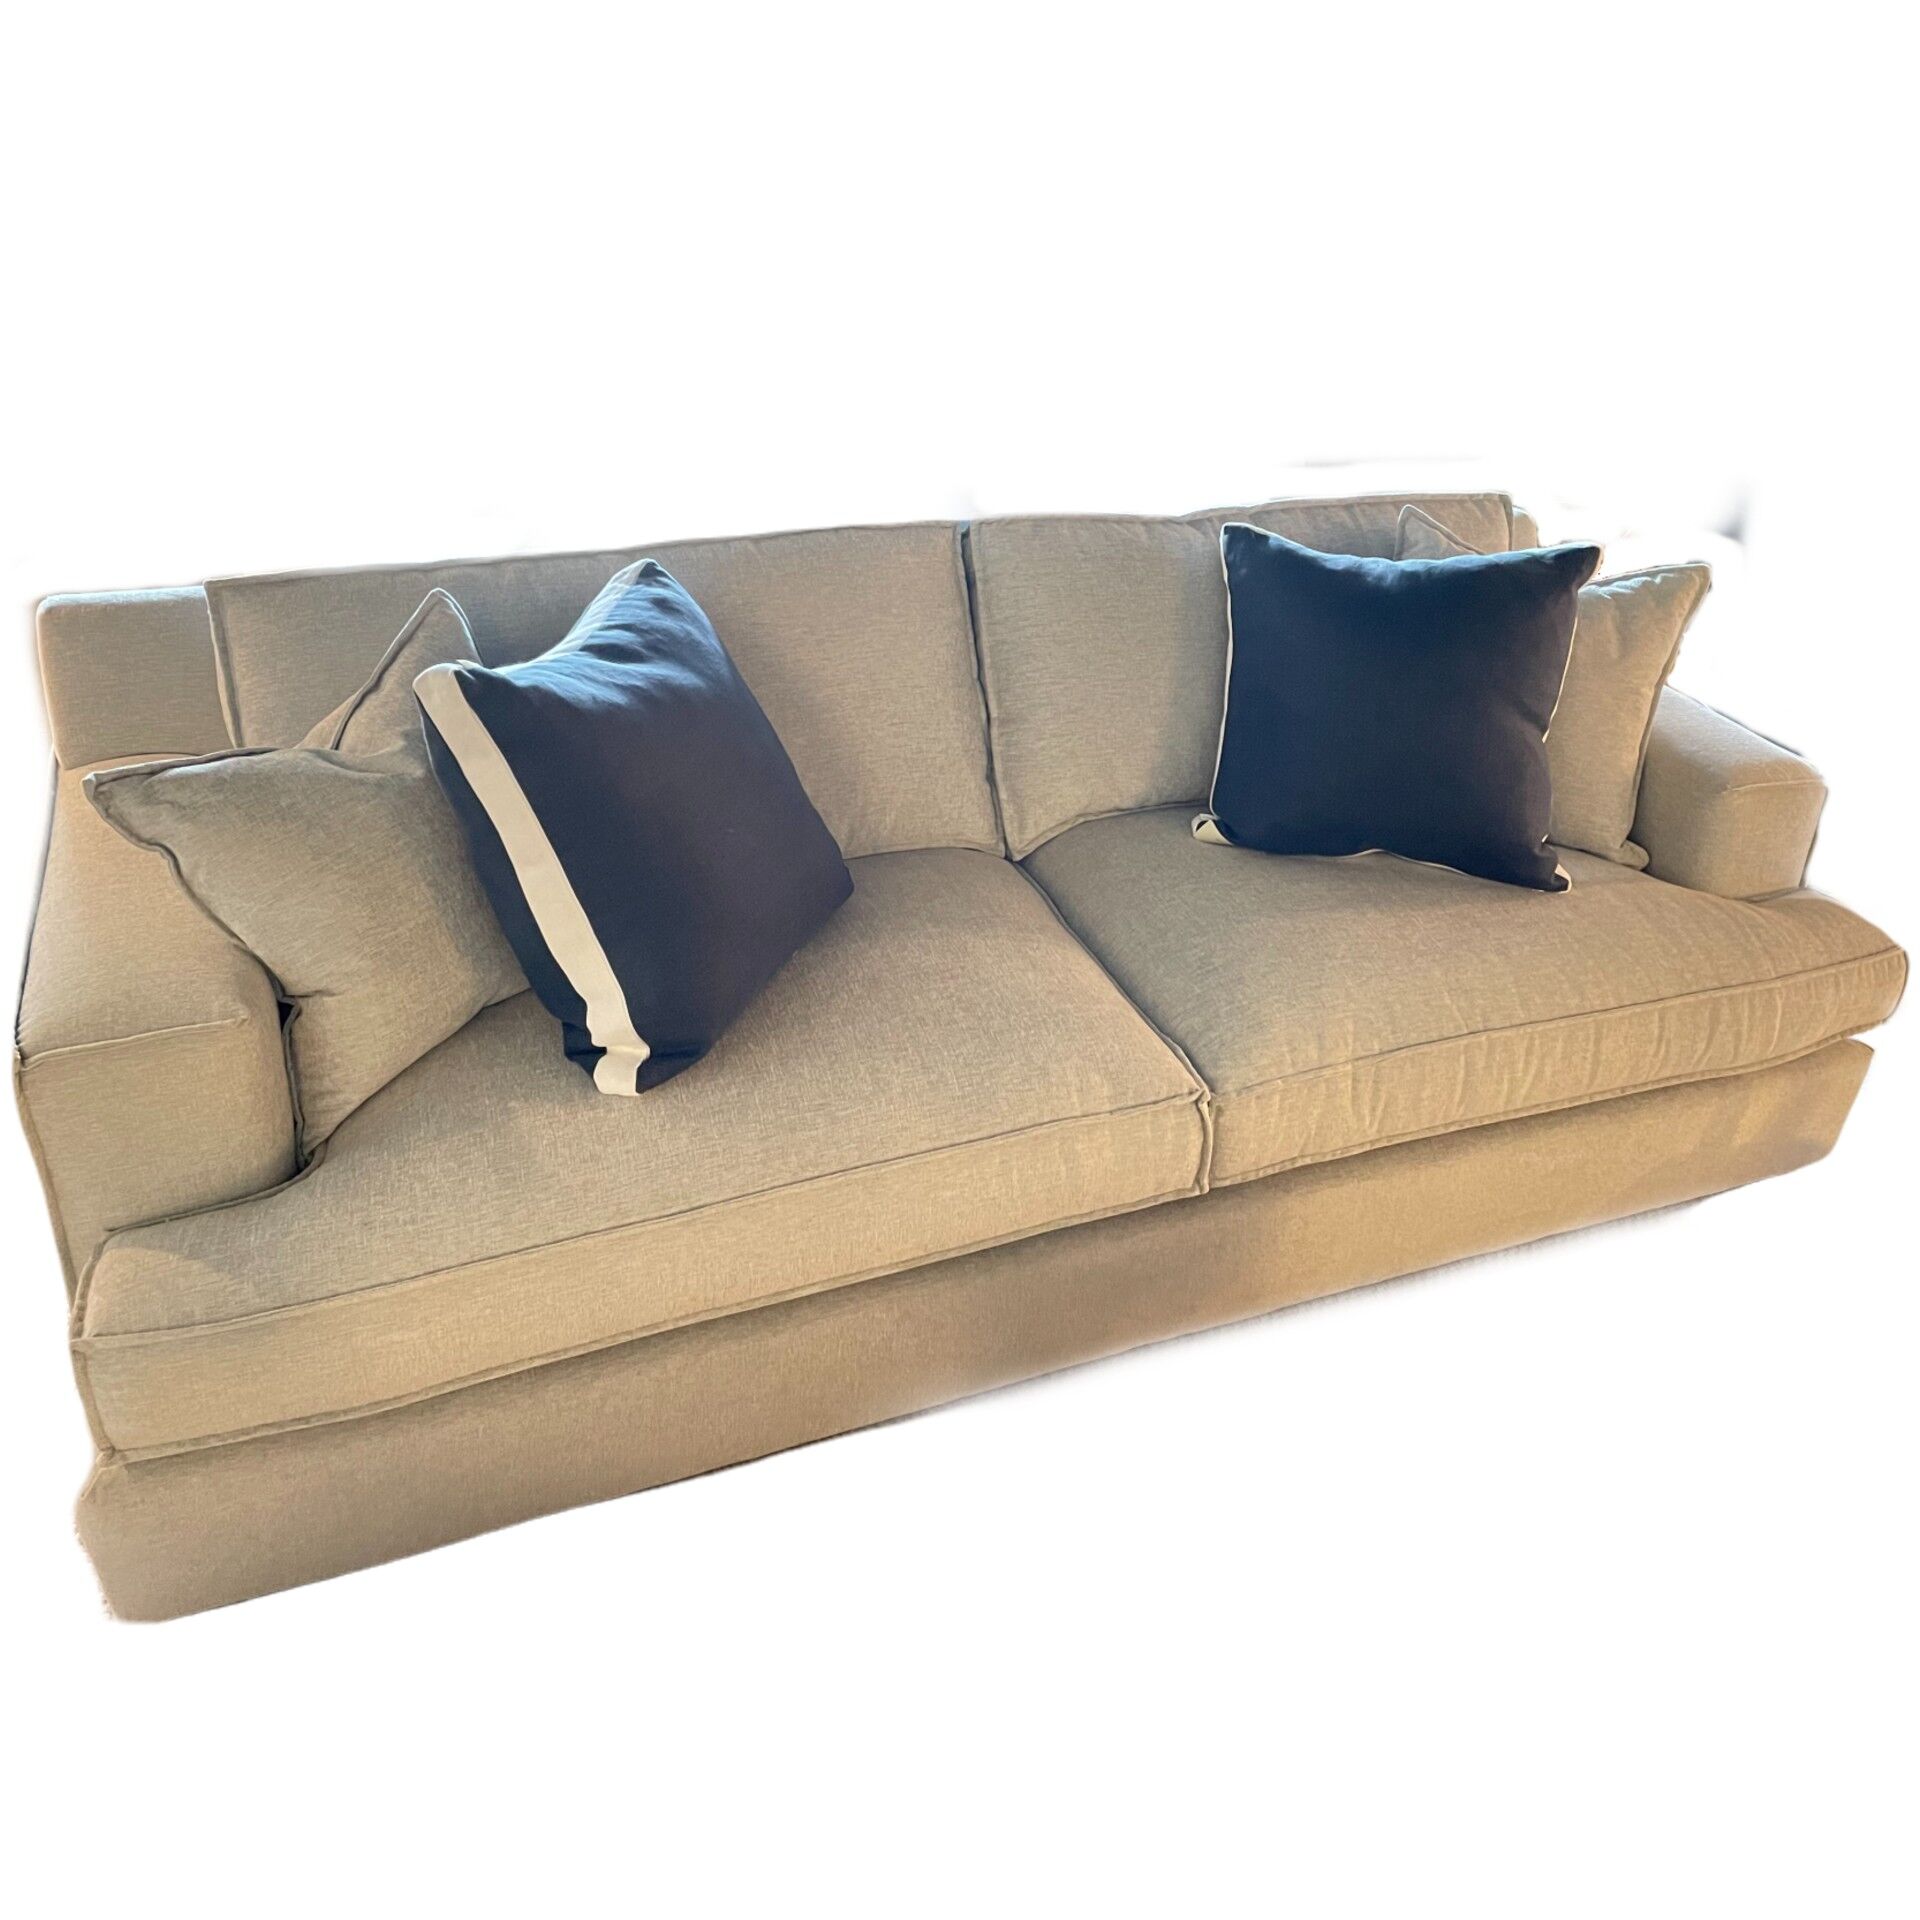 Couch Seat Support, Under Couch Cushion Support[20 x Nepal